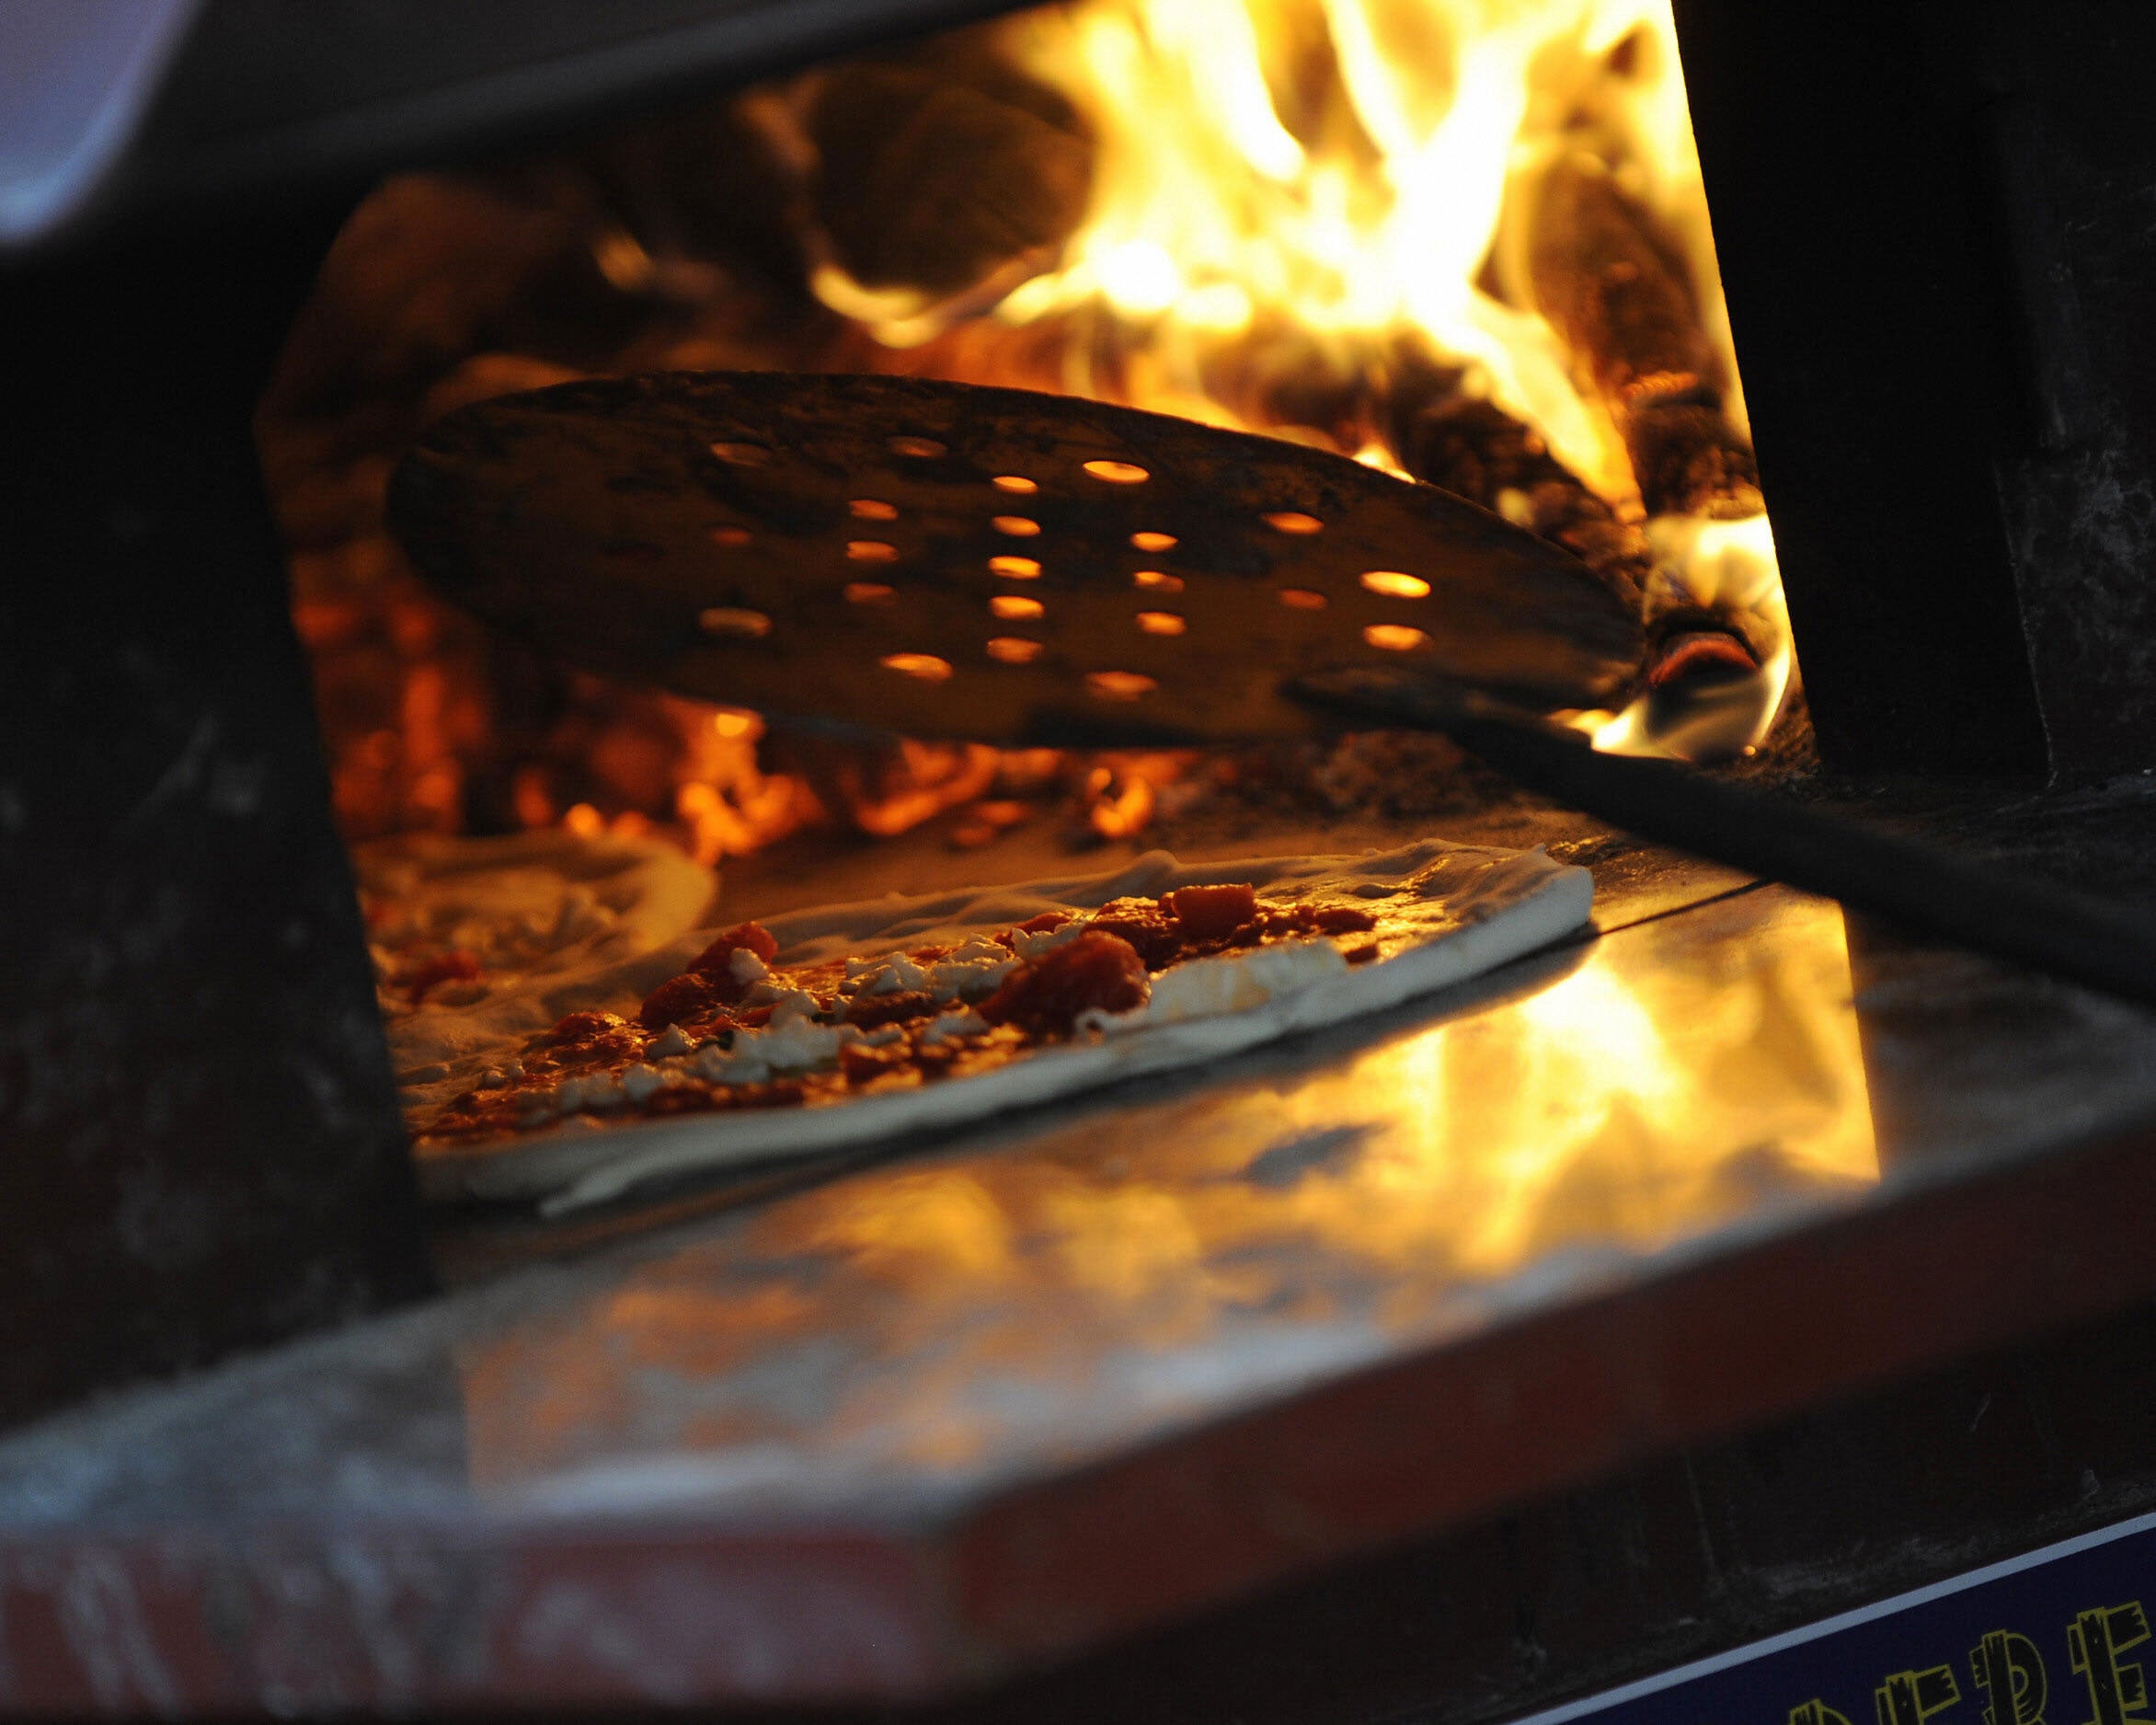 Wood-fired pizzas have been banned in San Vitaliano to curb pollution